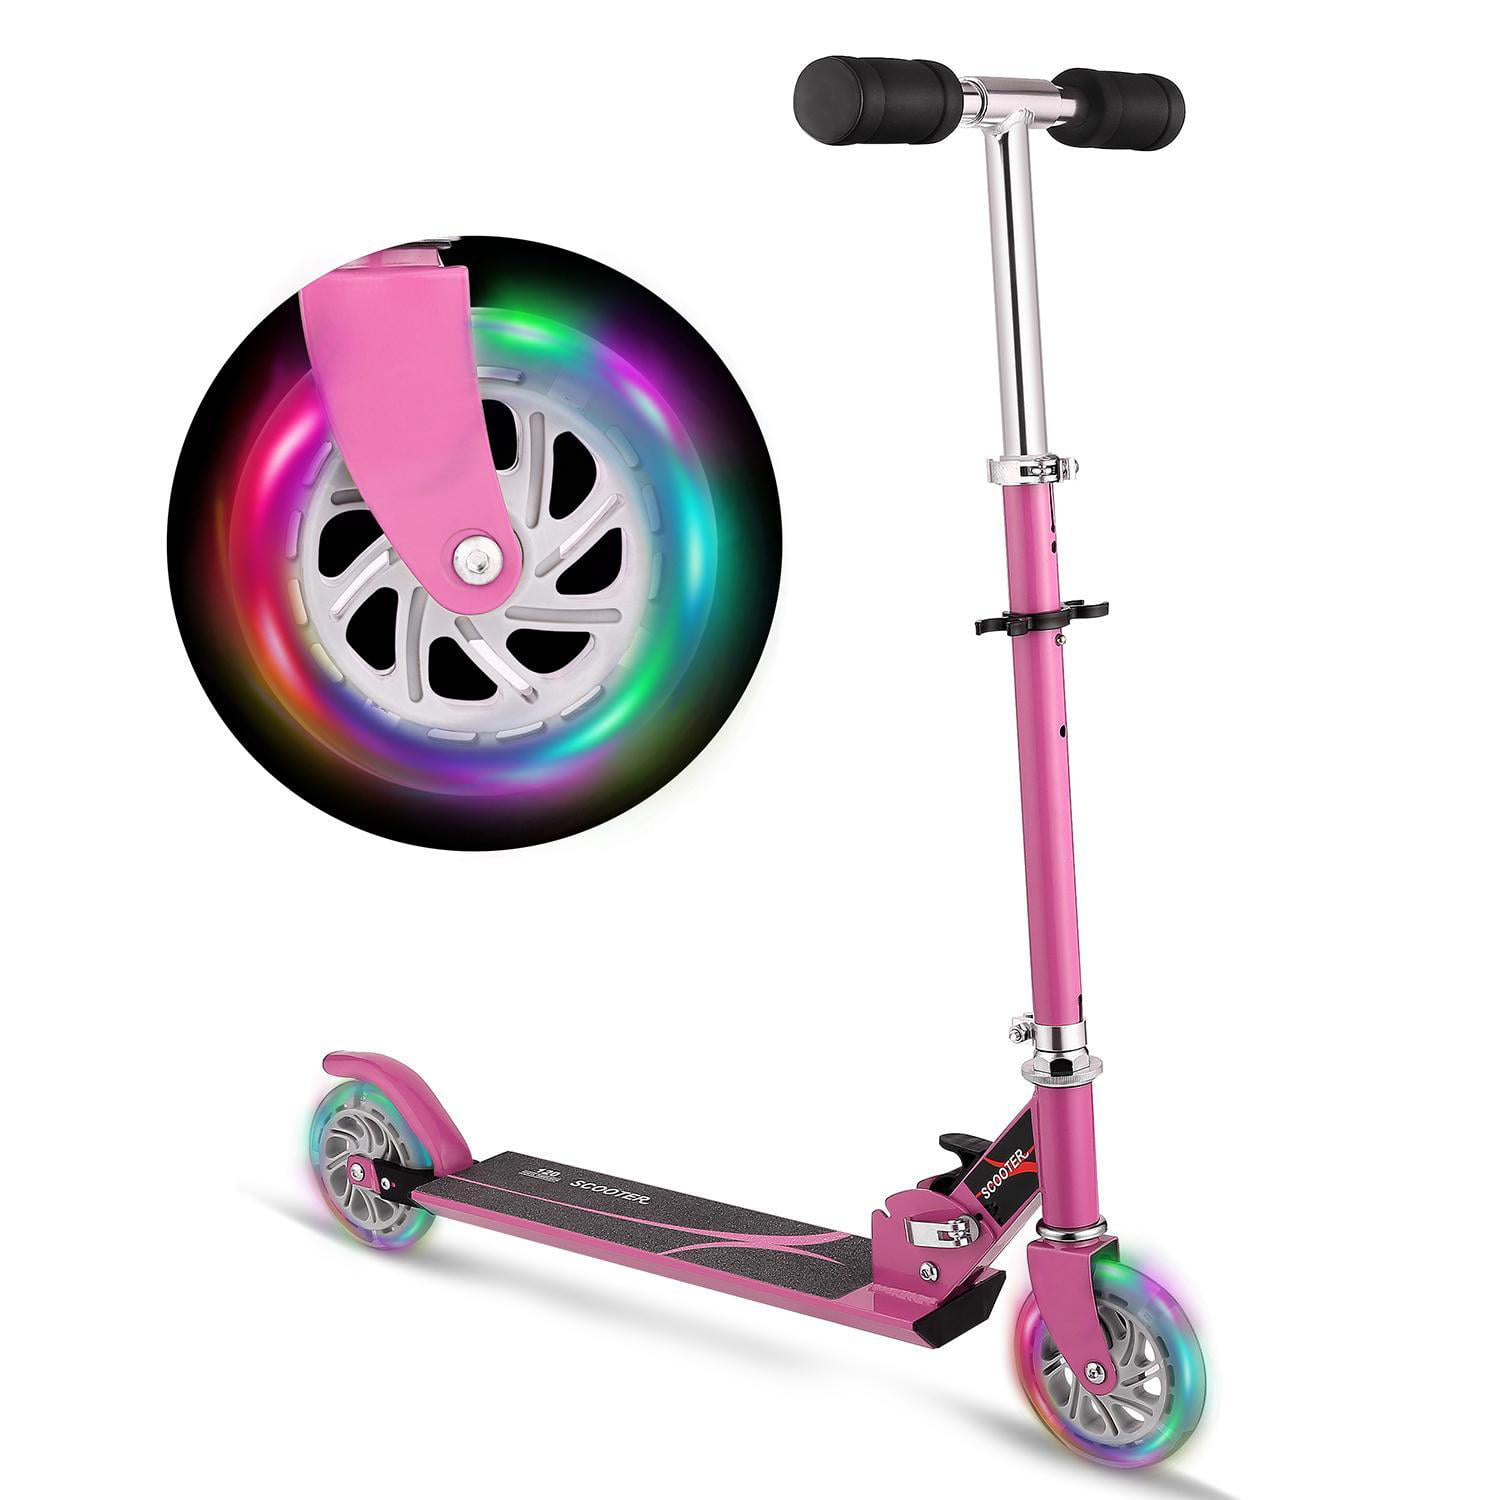 Kids Scooter Unisex Y Flyer Pedaling Stepper Scooter for Kids Best For Age 7+ 